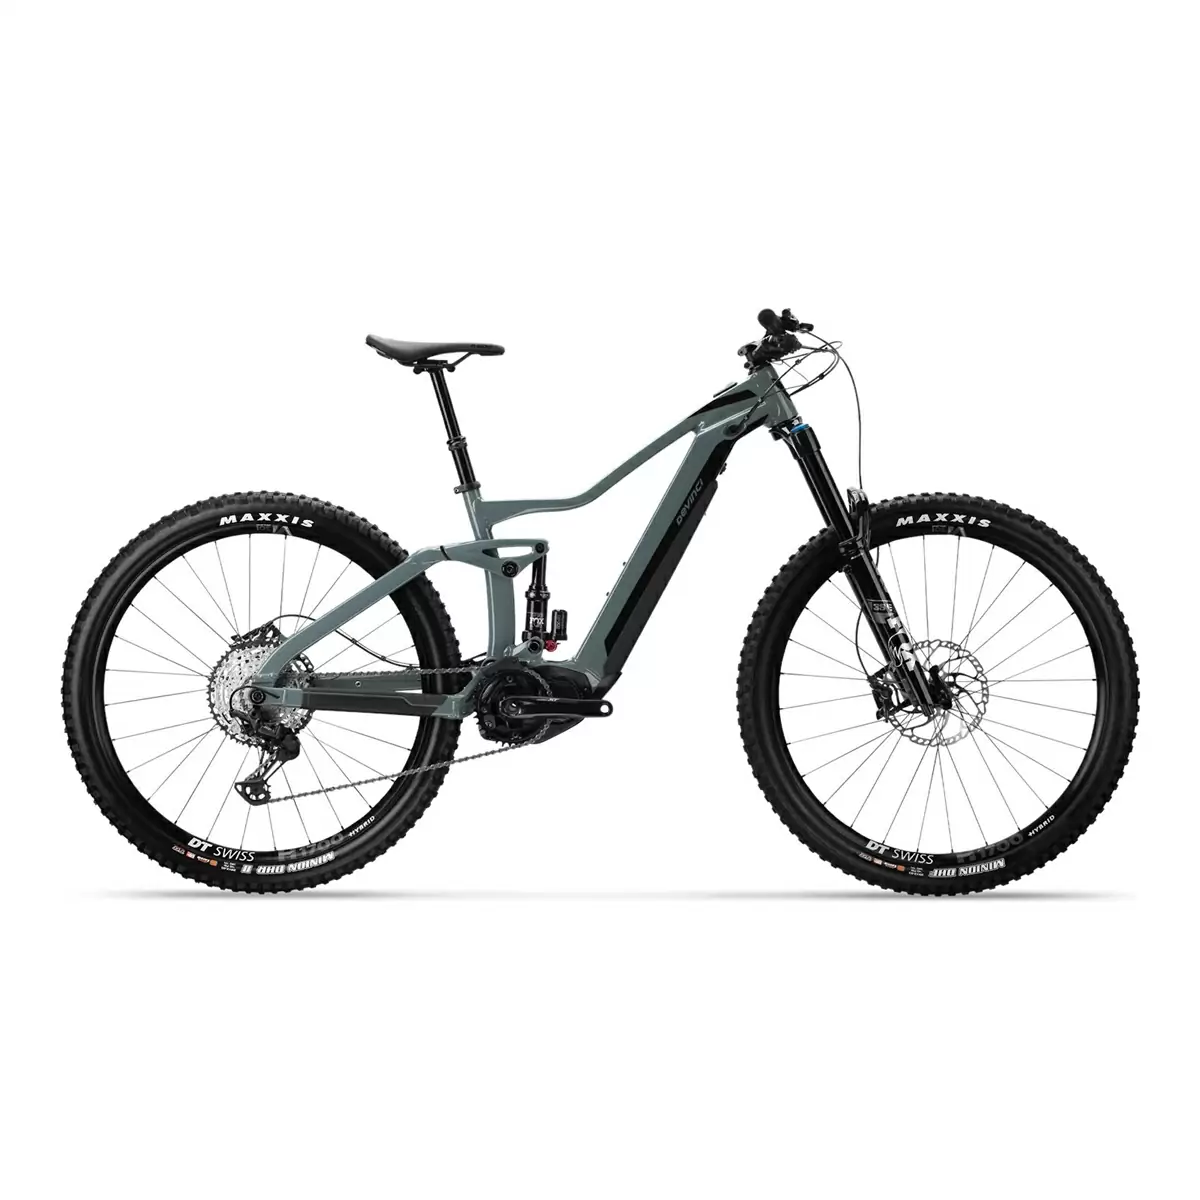 DC XT 29'' 160mm 12s 504Wh Shimano EP8 Charcoal Size L - image